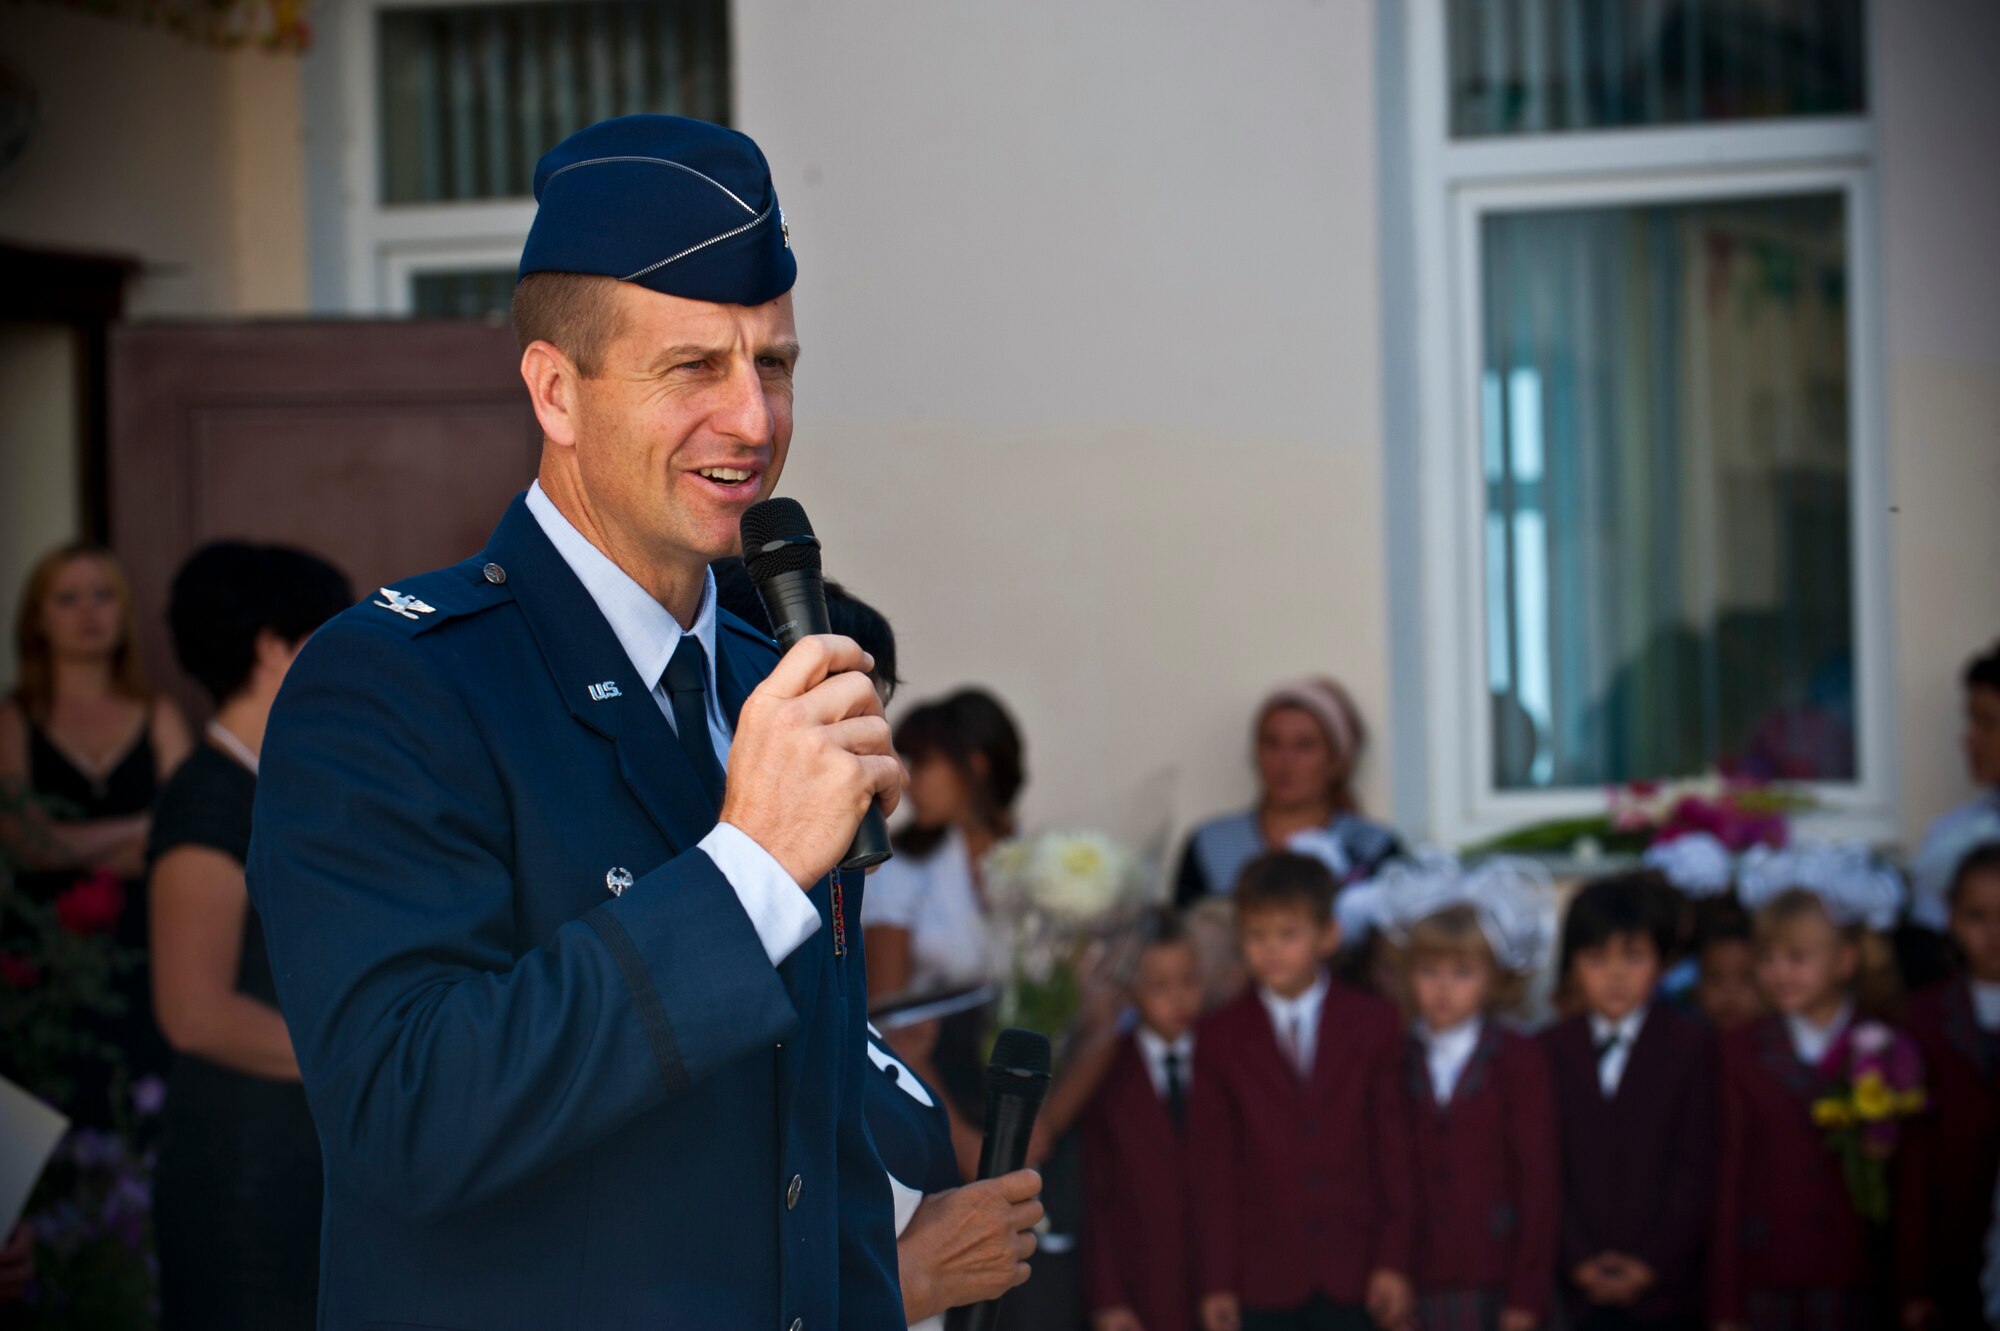 Col. Corey Martin, Transit Center at Manas director, shares remarks during the "First Bell" ceremony at the Birdik Elementary School in Bishkek, Kyrgyzstan, Sept. 1, 2012. Martin thanked parents and teachers for their dedication and hard work for providing education to the children. (U.S. Air Force photo/Senior Airman Brett Clashman)